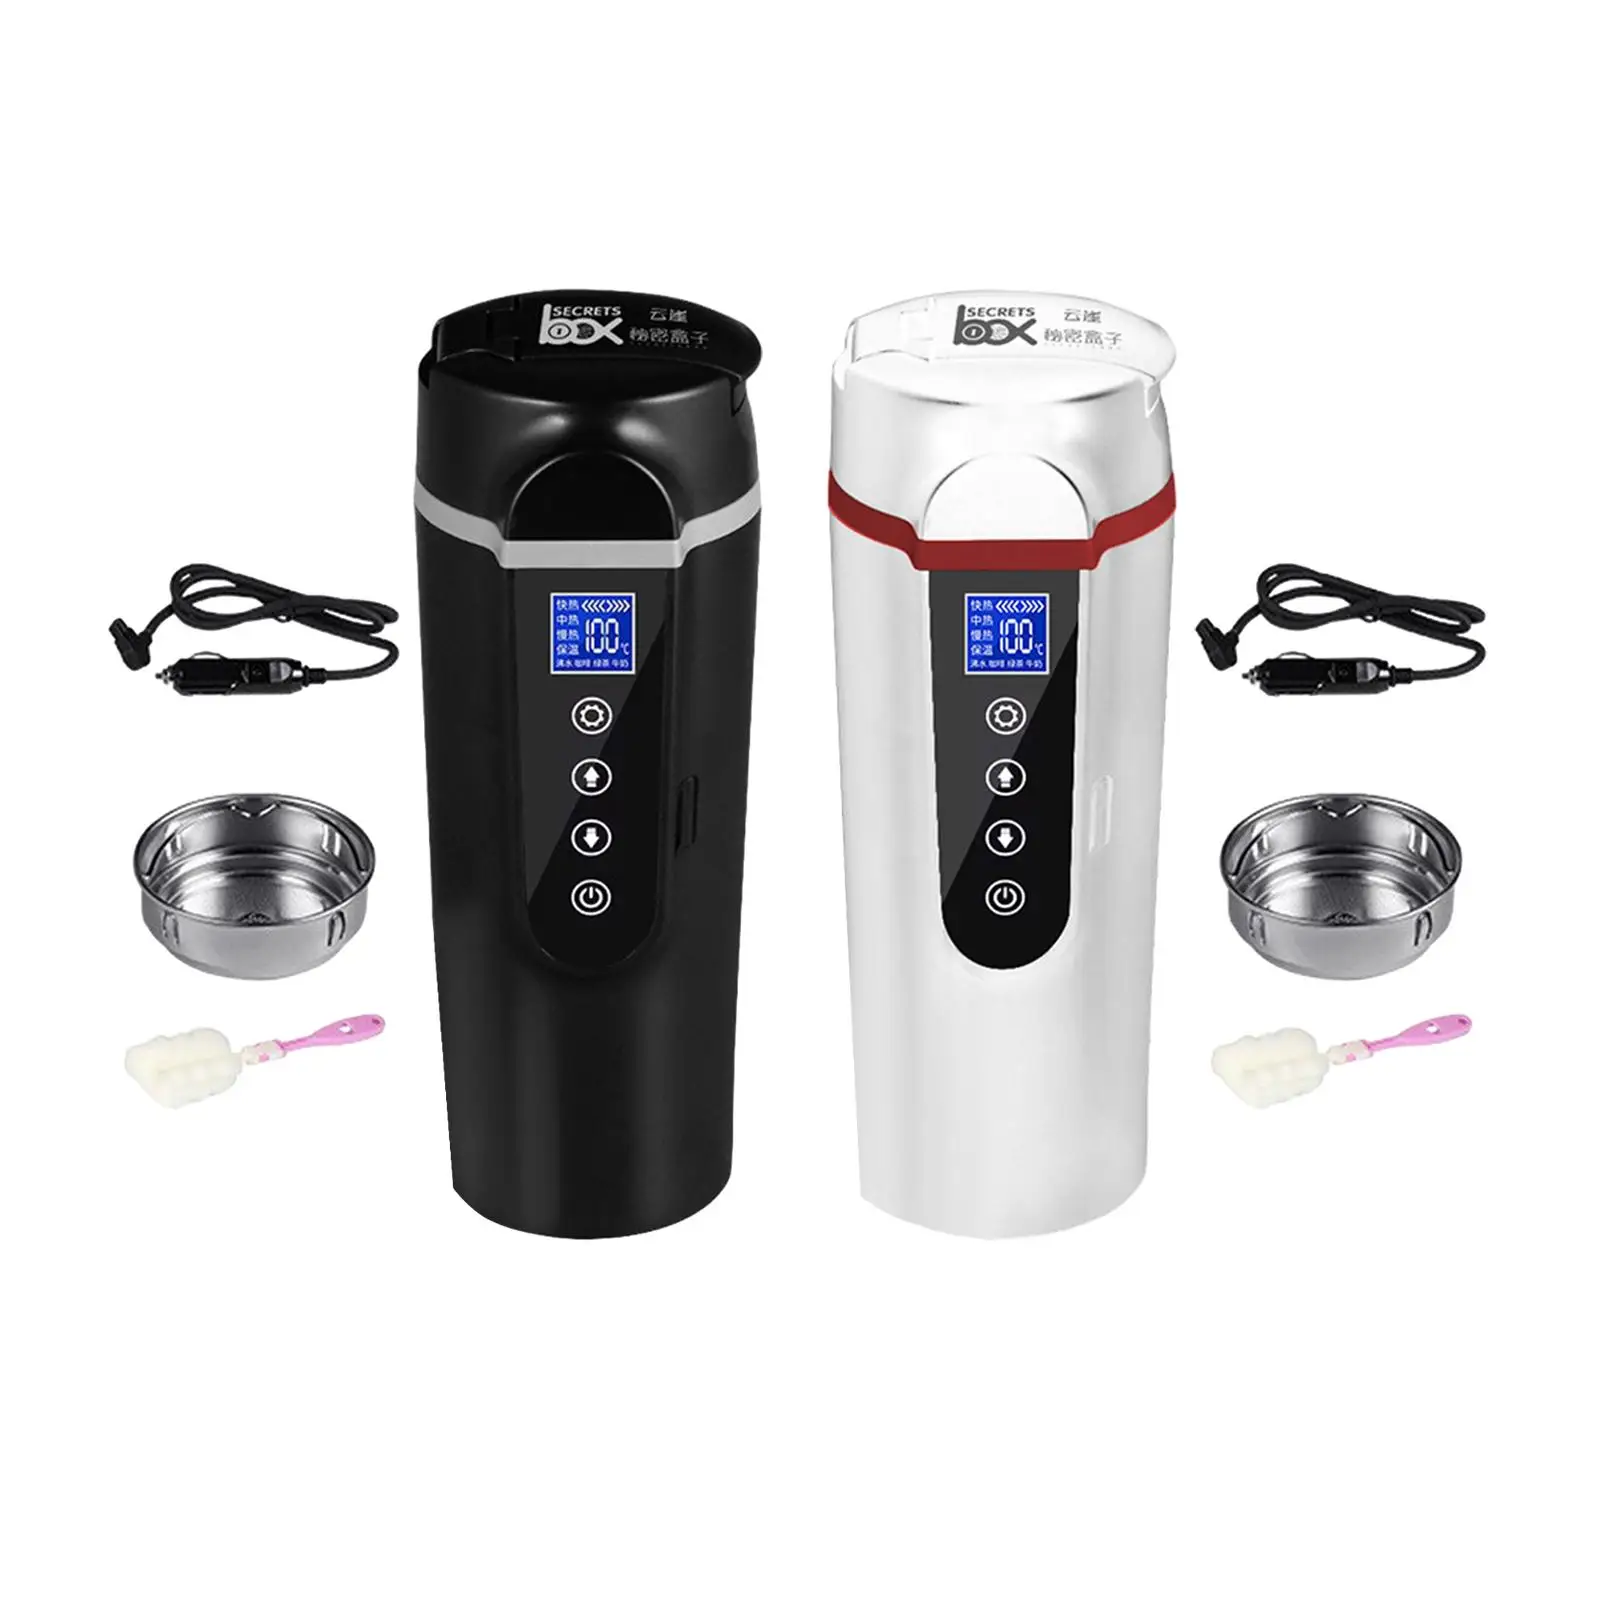 

Car Heating Cup Adjustable Temps Stainless Steel Travel Coffee Mugs Warmer for Drivers Trip Vehicles Car Truck Tea Water Milk